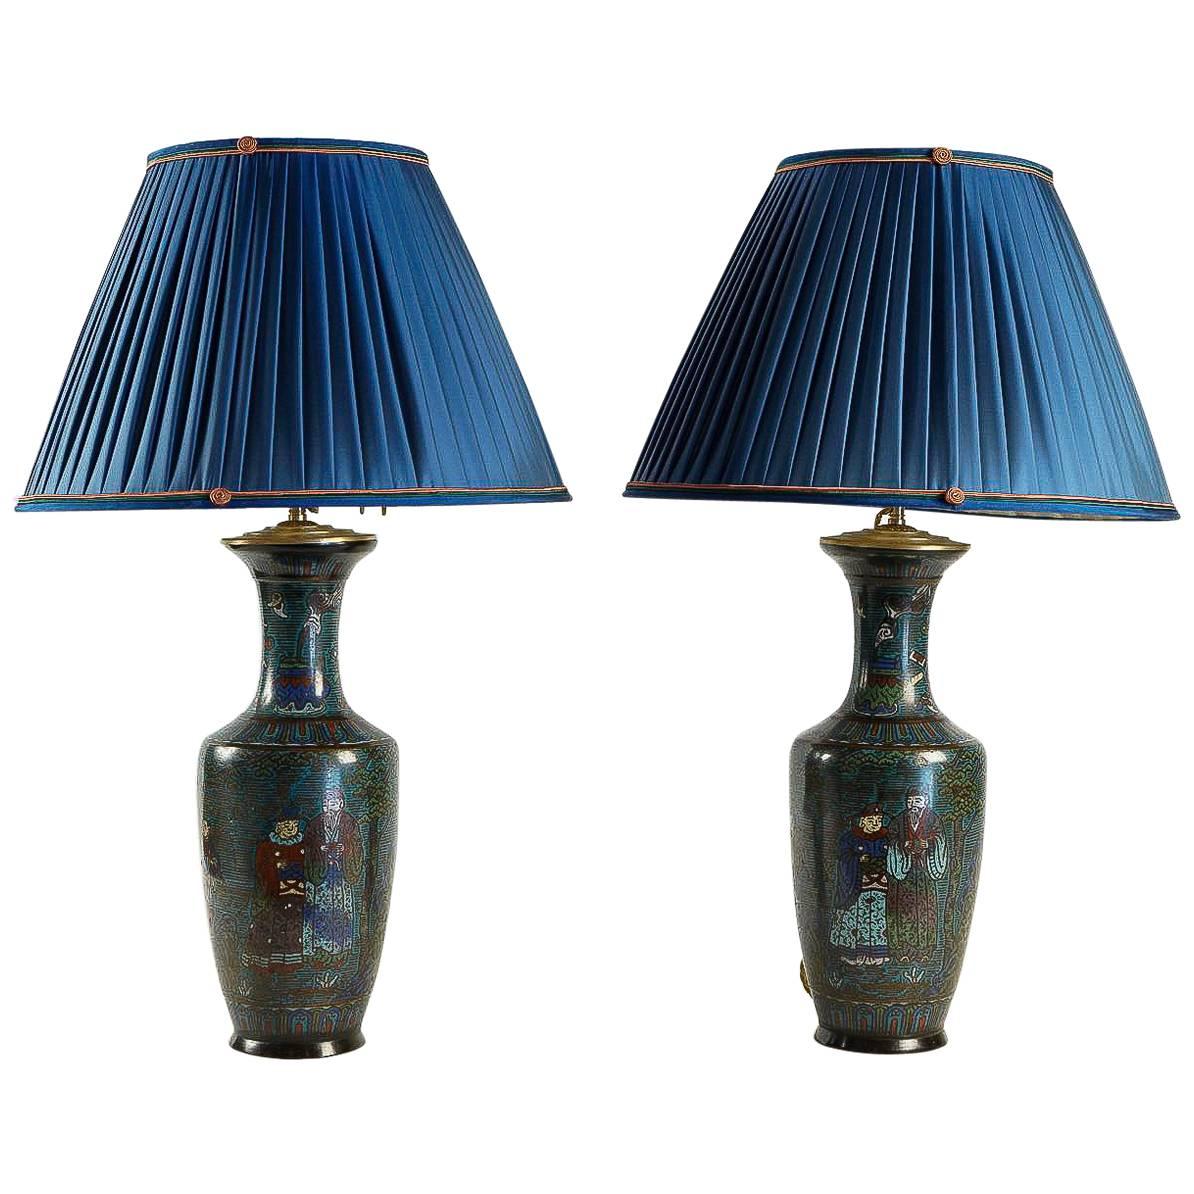 China 19th Century, Pair of Bronze "Cloisonné" Vases Converted in Table Lamps